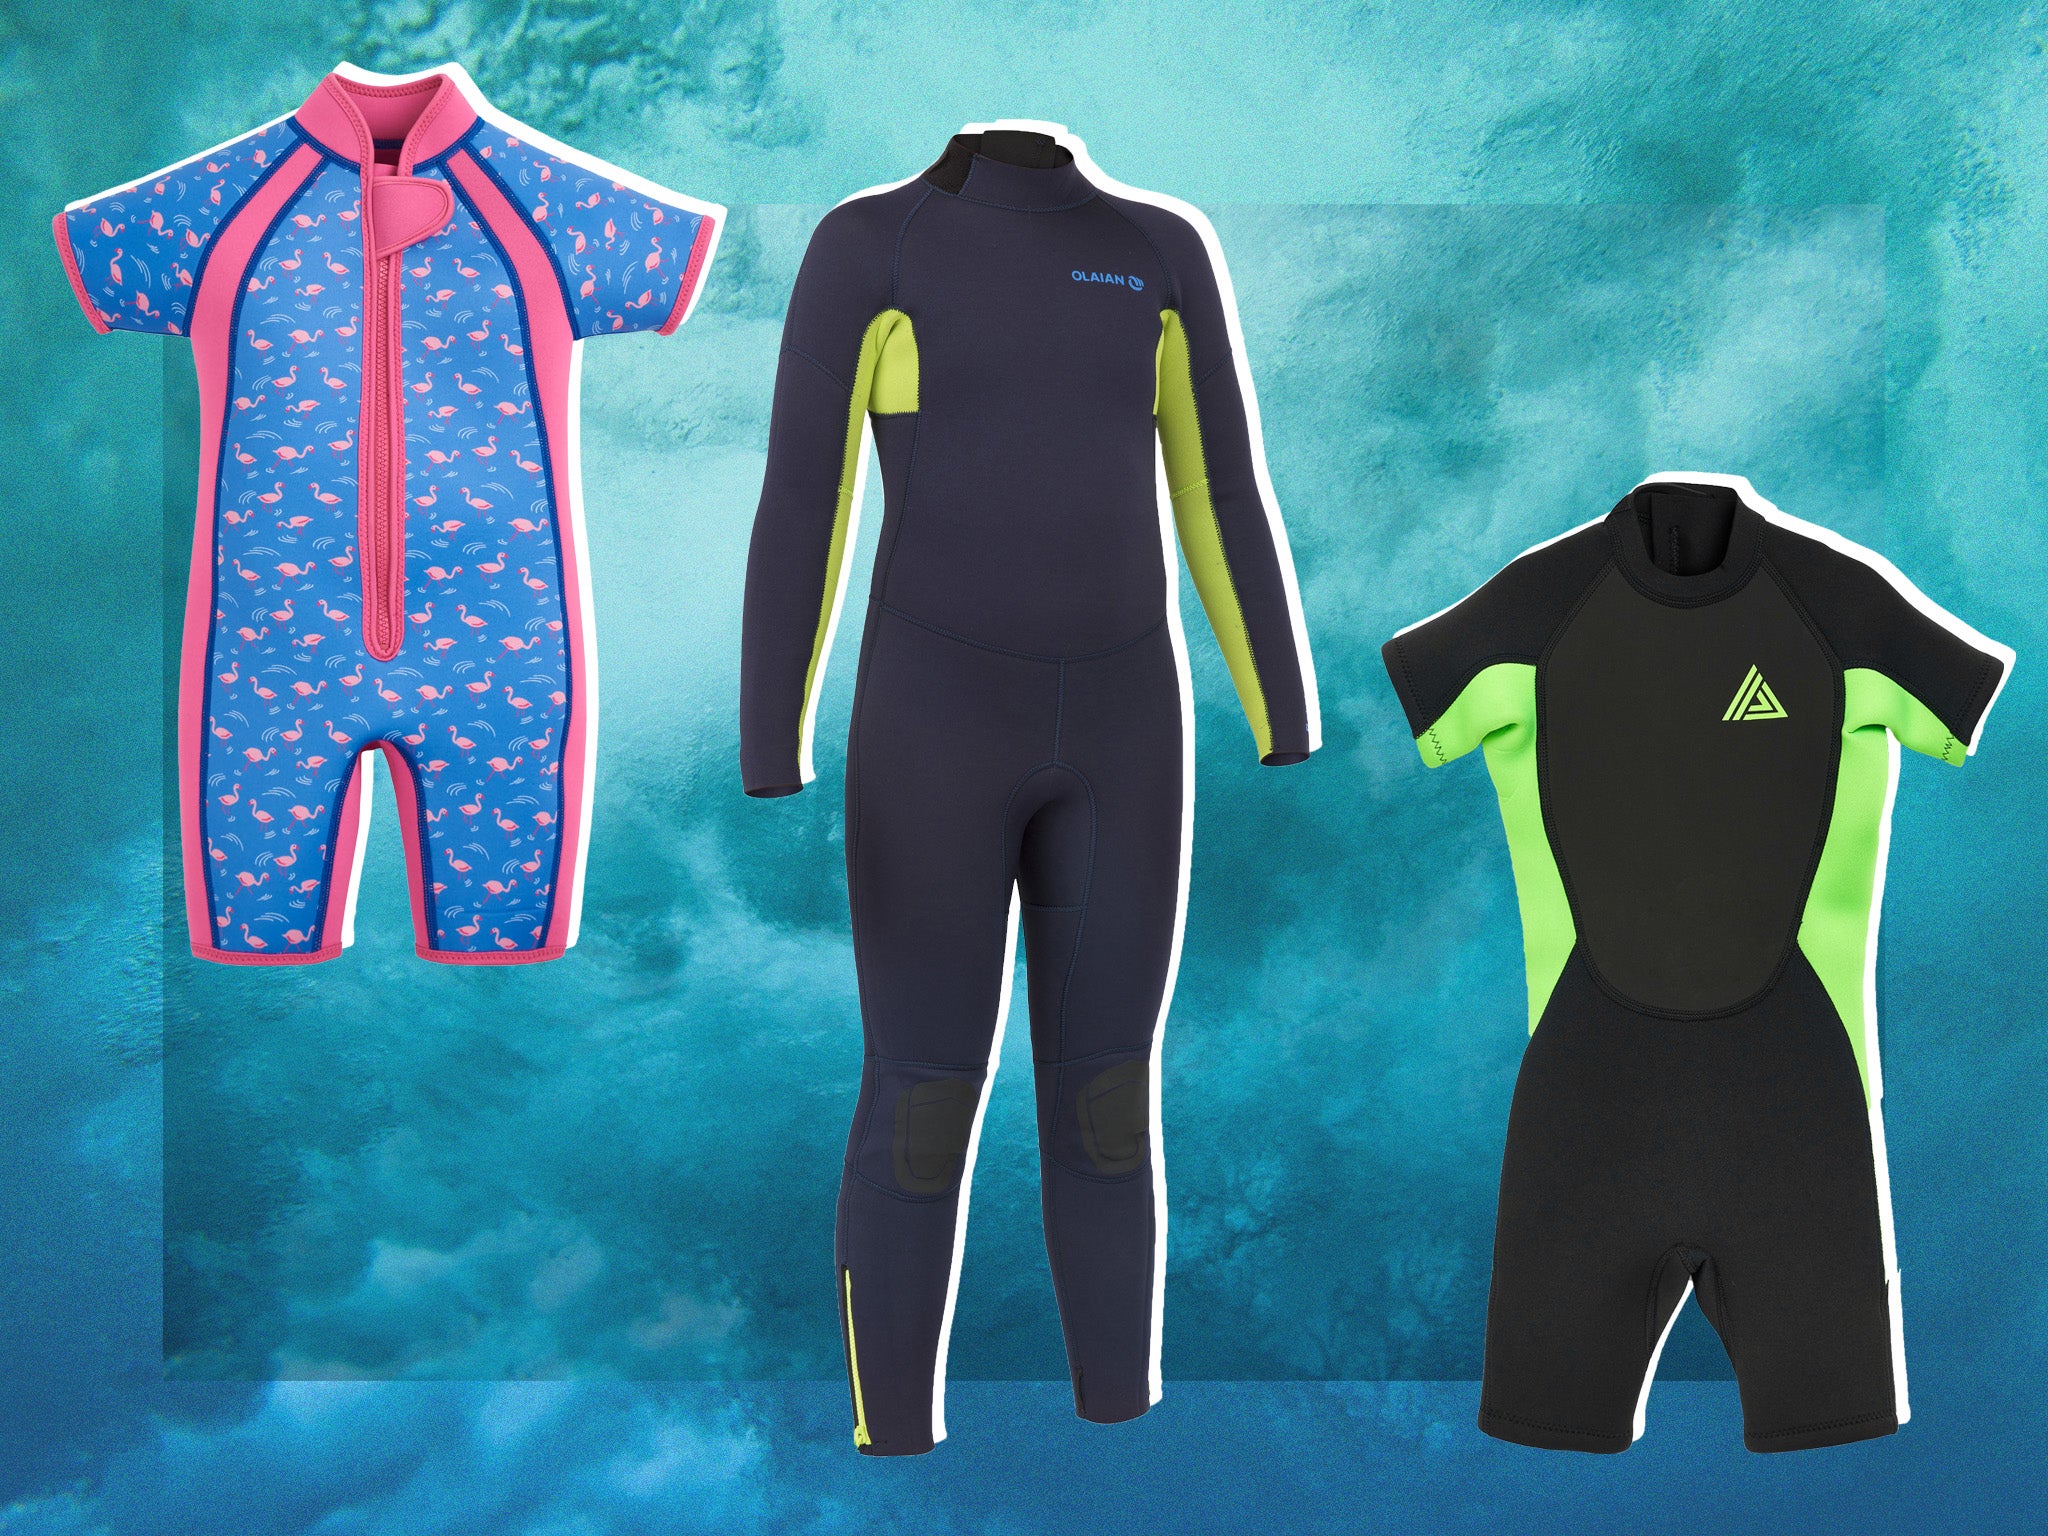 Kids Professional 2.5mm Neoprene Diving Suit Youth Thermal